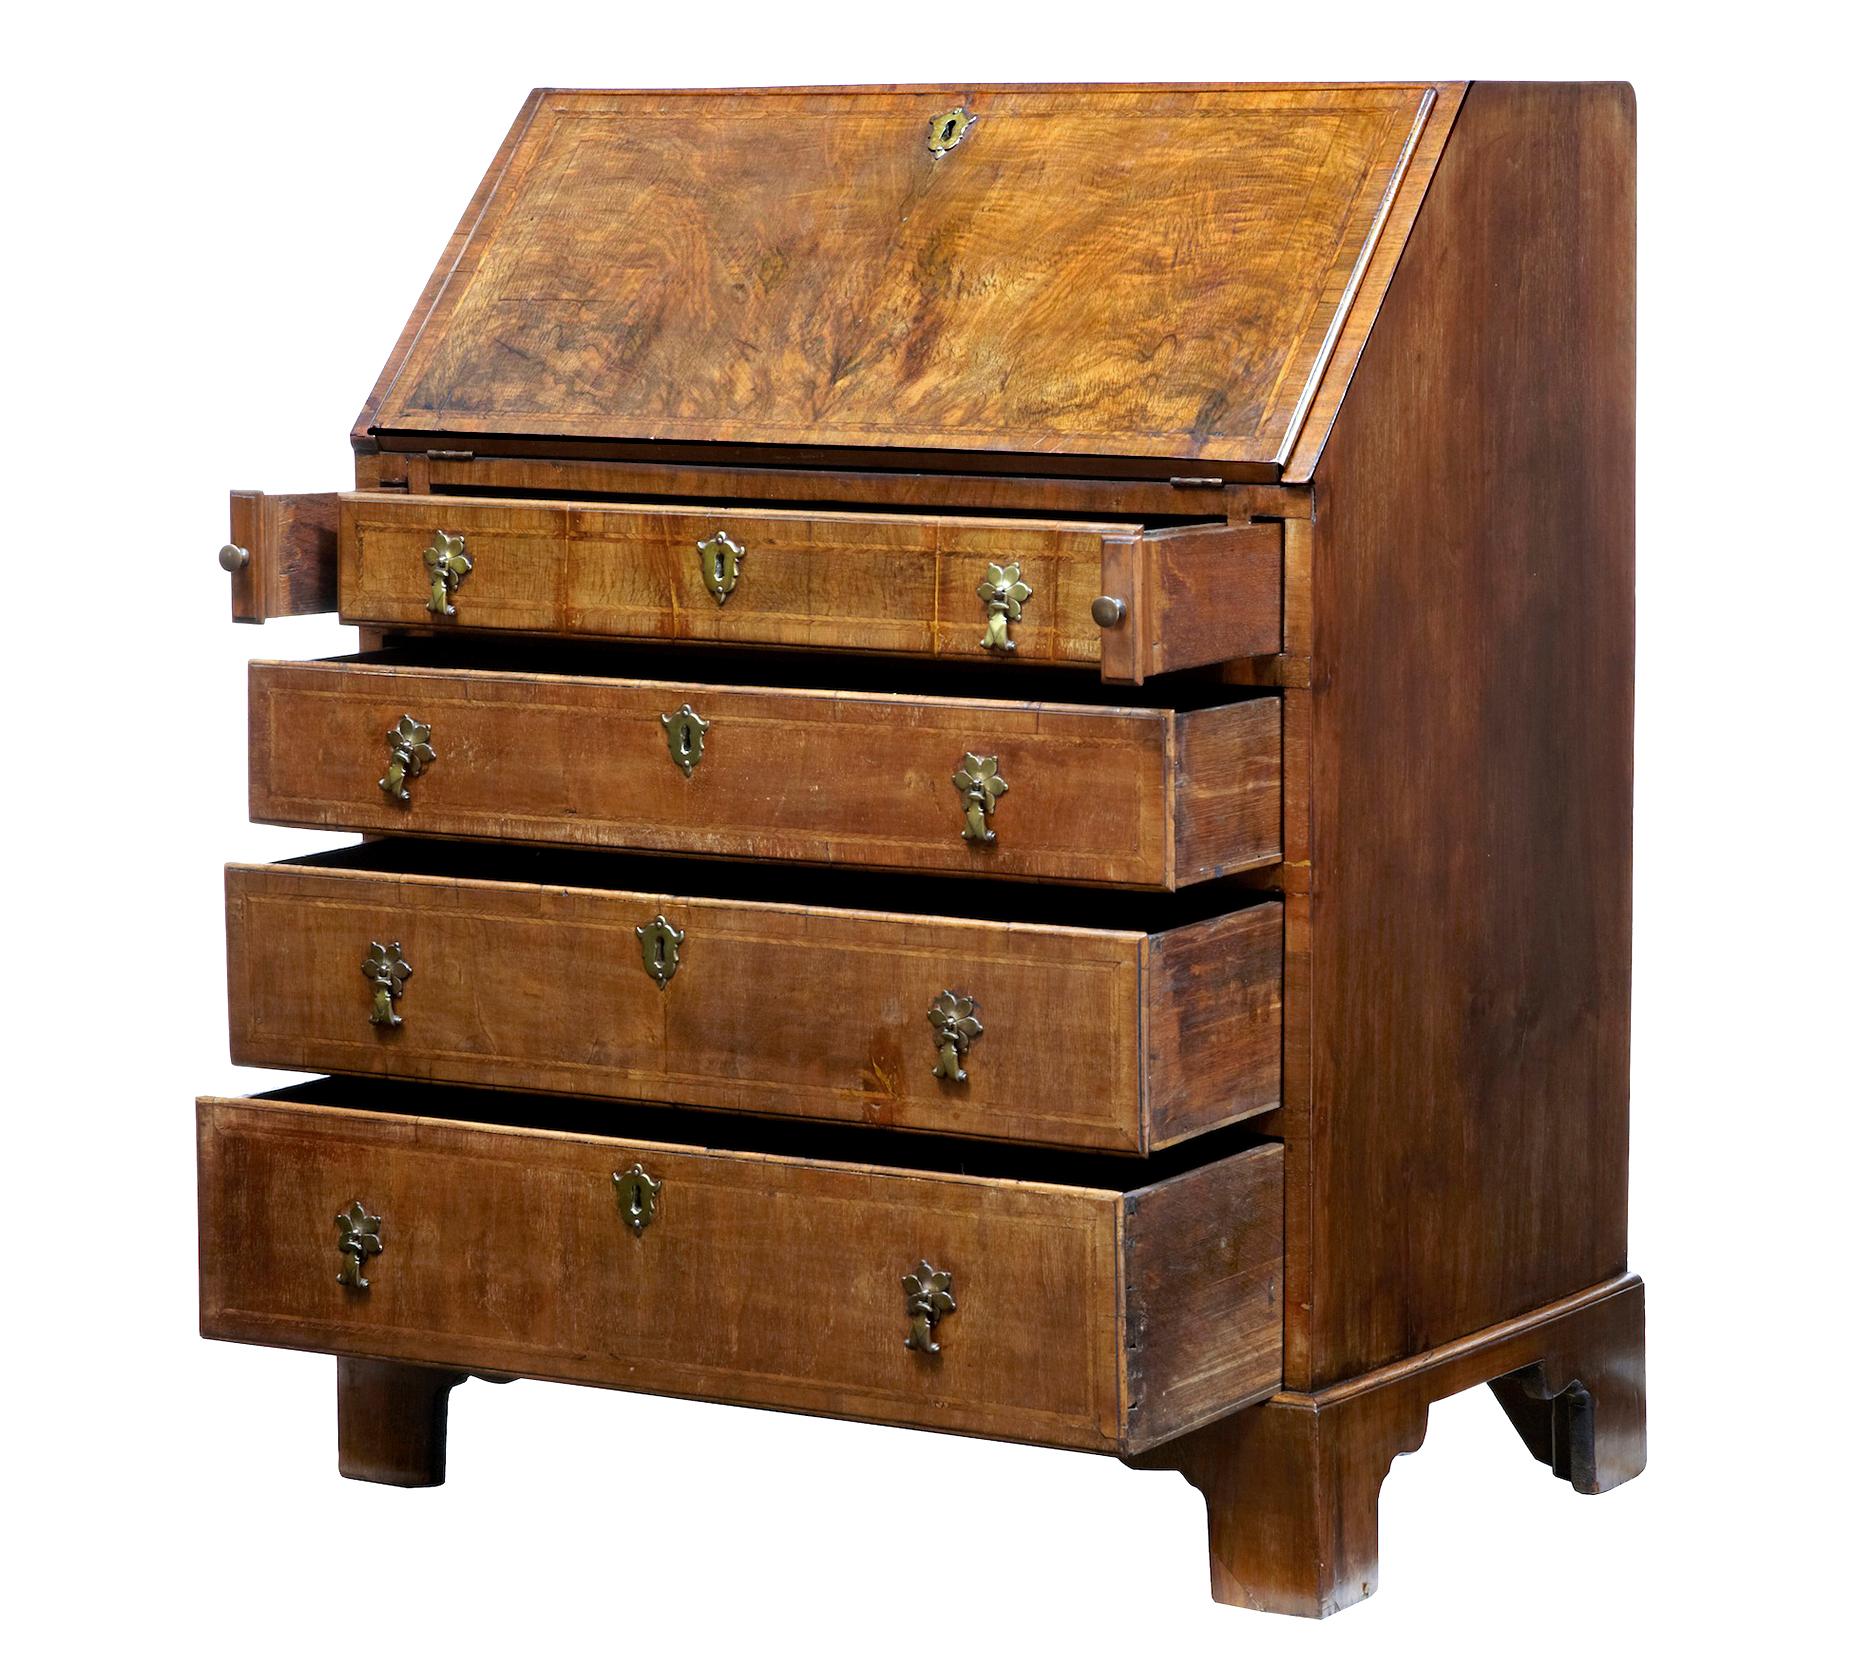 Good quality 18th century walnut bureau of small proportions circa 1780.

Fall and drawer fronts veneered in walnut with cross banding detail. Fall drops down to form a writing surface and fitted interior of pigeon holes over 4 drawers.

4